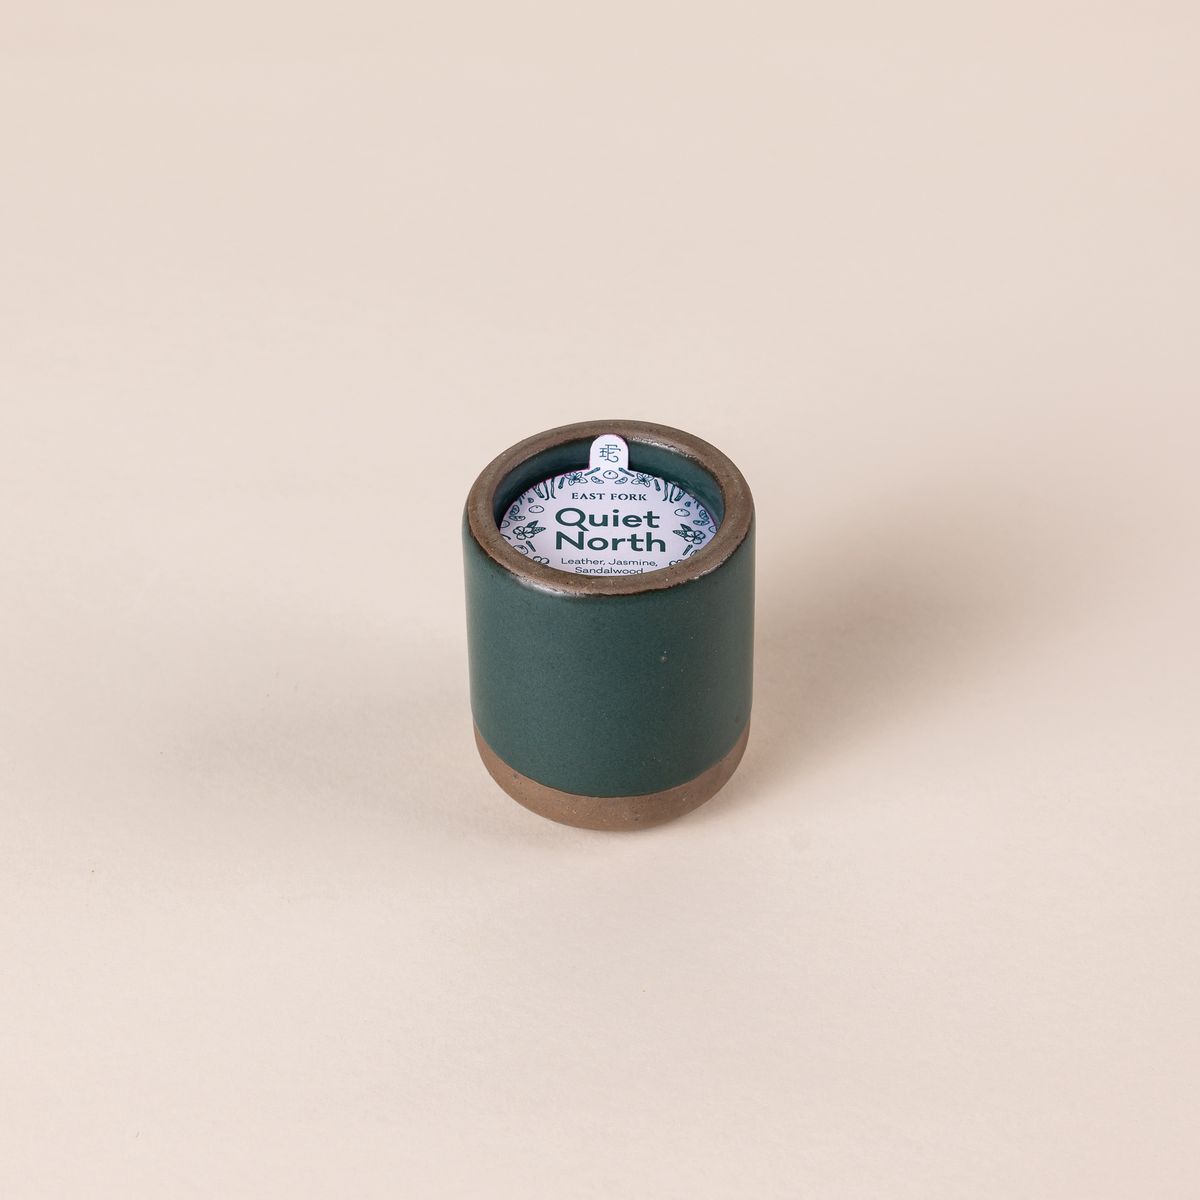 Small ceramic vessel in a deep dark teal color with candle inside. On top is a packaging label sitting on top that reads "Quiet North"